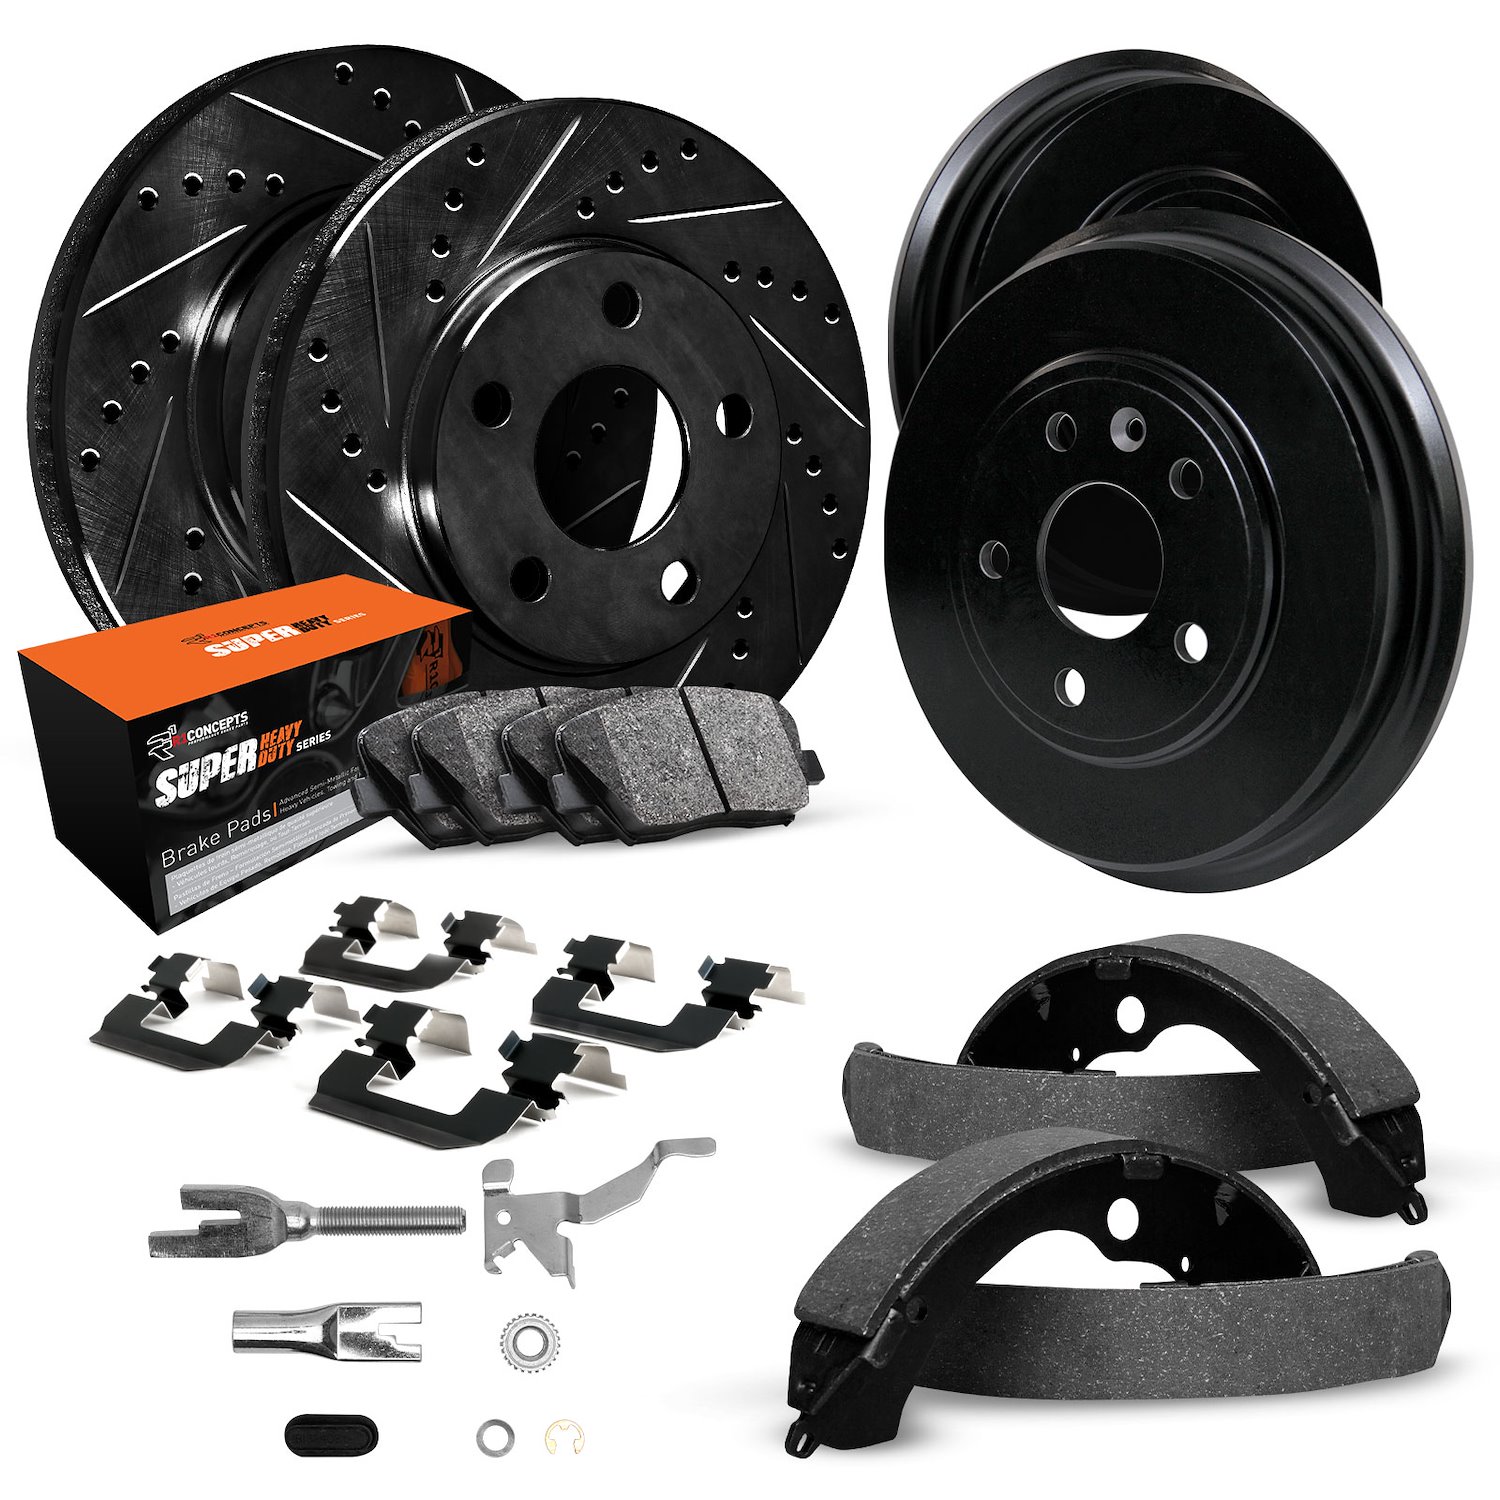 E-Line Slotted Black Brake Rotor & Drum Set w/Super-Duty Pads, Shoes, Hardware/Adjusters, 1992-1993 Ford/Lincoln/Mercury/Mazda